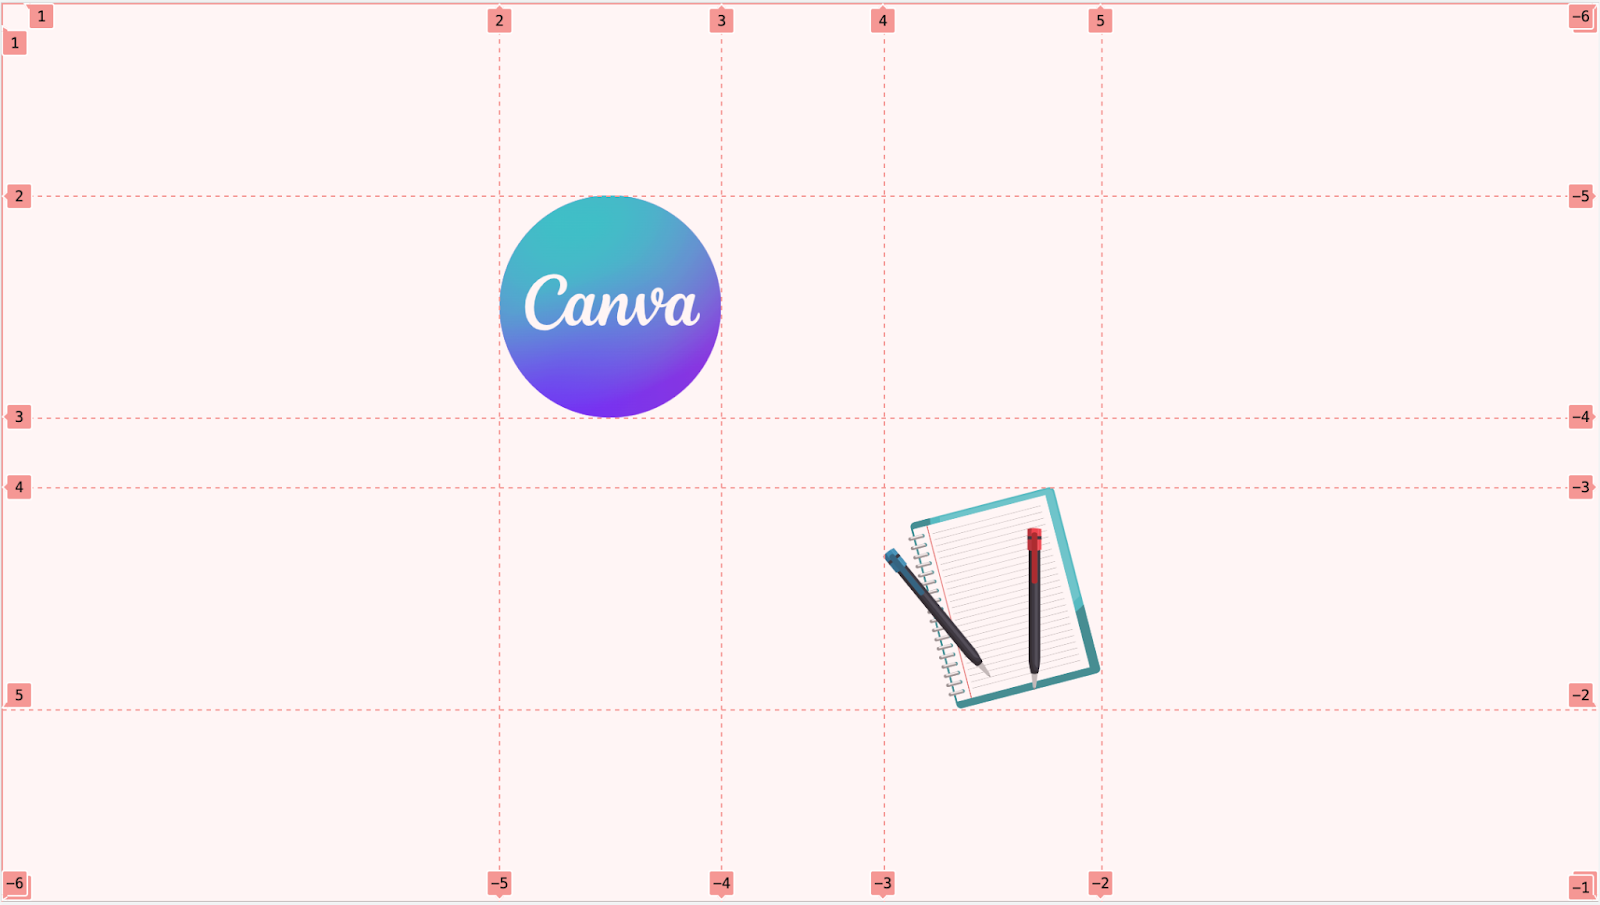 A basic design with two elements: a Canva logo and notepad. There are gridlines overlaid on the design.